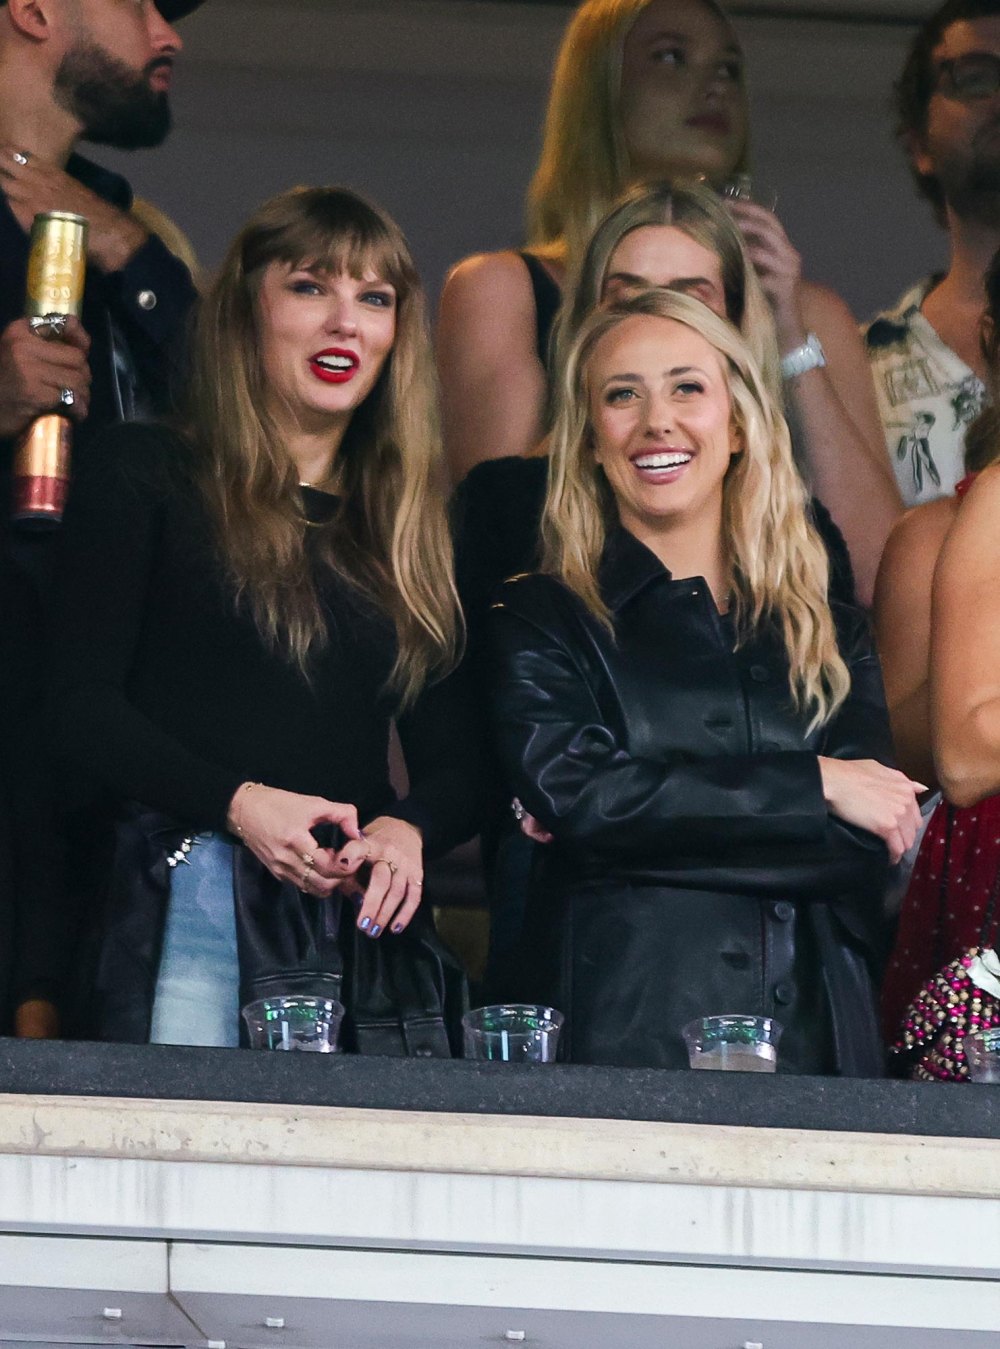 Brittany Mahomes Is Thrilled to Build a Genuine Friendship With Taylor Swift 286 Taylor Swift, Brittany Mahomes, Blake Lively, Hugh Jackman, and Ryan Reynolds watch from the stands during an NFL football game between the New York Jets and the Kansas City Chiefs at MetLife Stadium